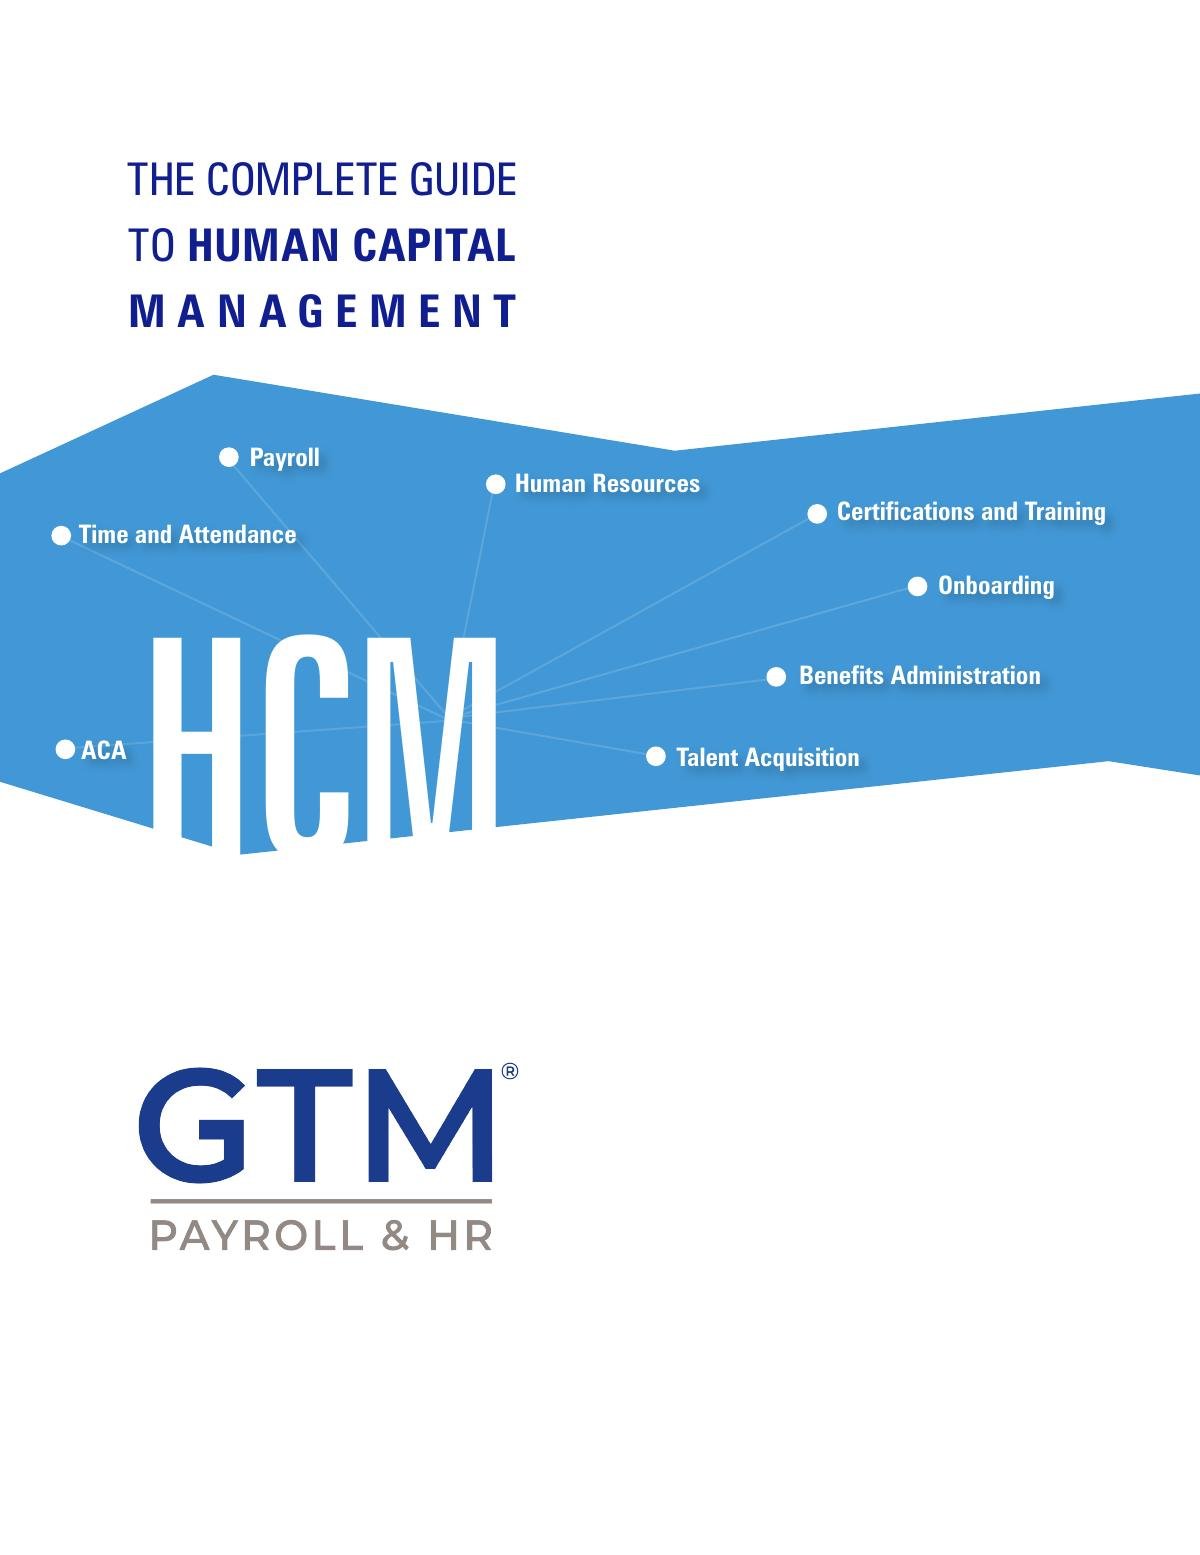 Complete Guide to Human Capital Management (HCM)